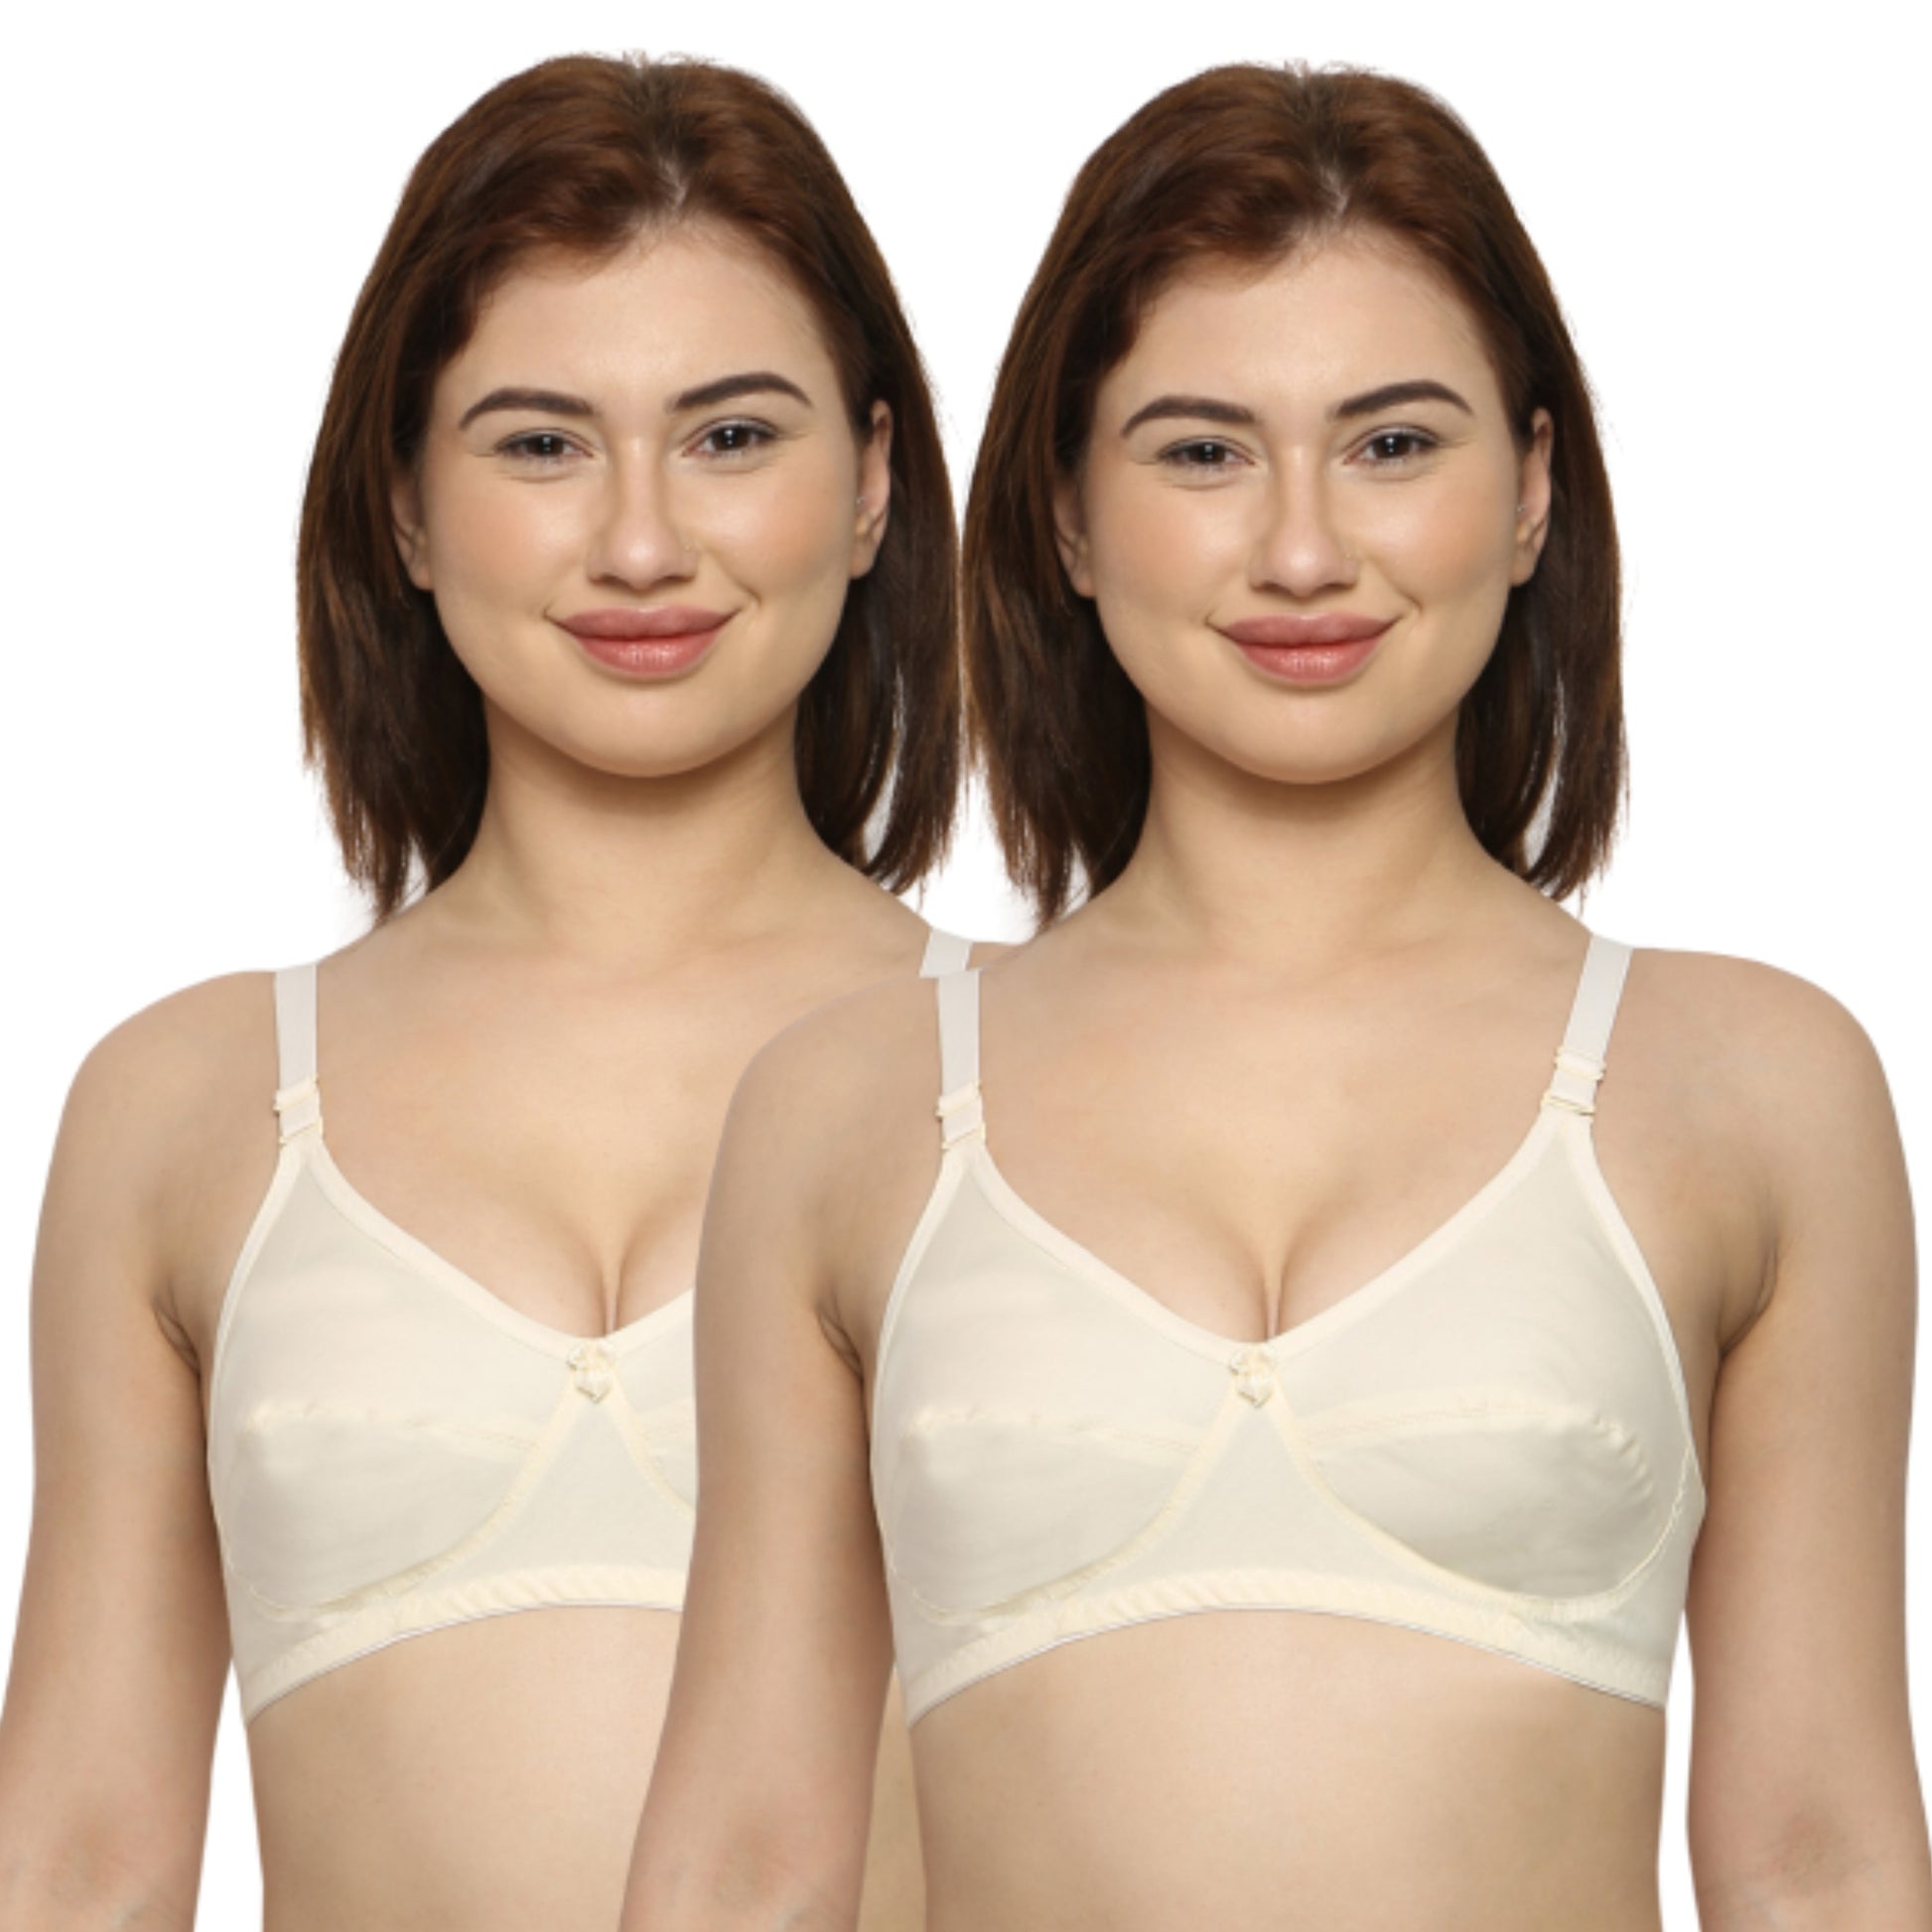 Sporty Non-Wired Padded Bras 2 Pack, Lingerie